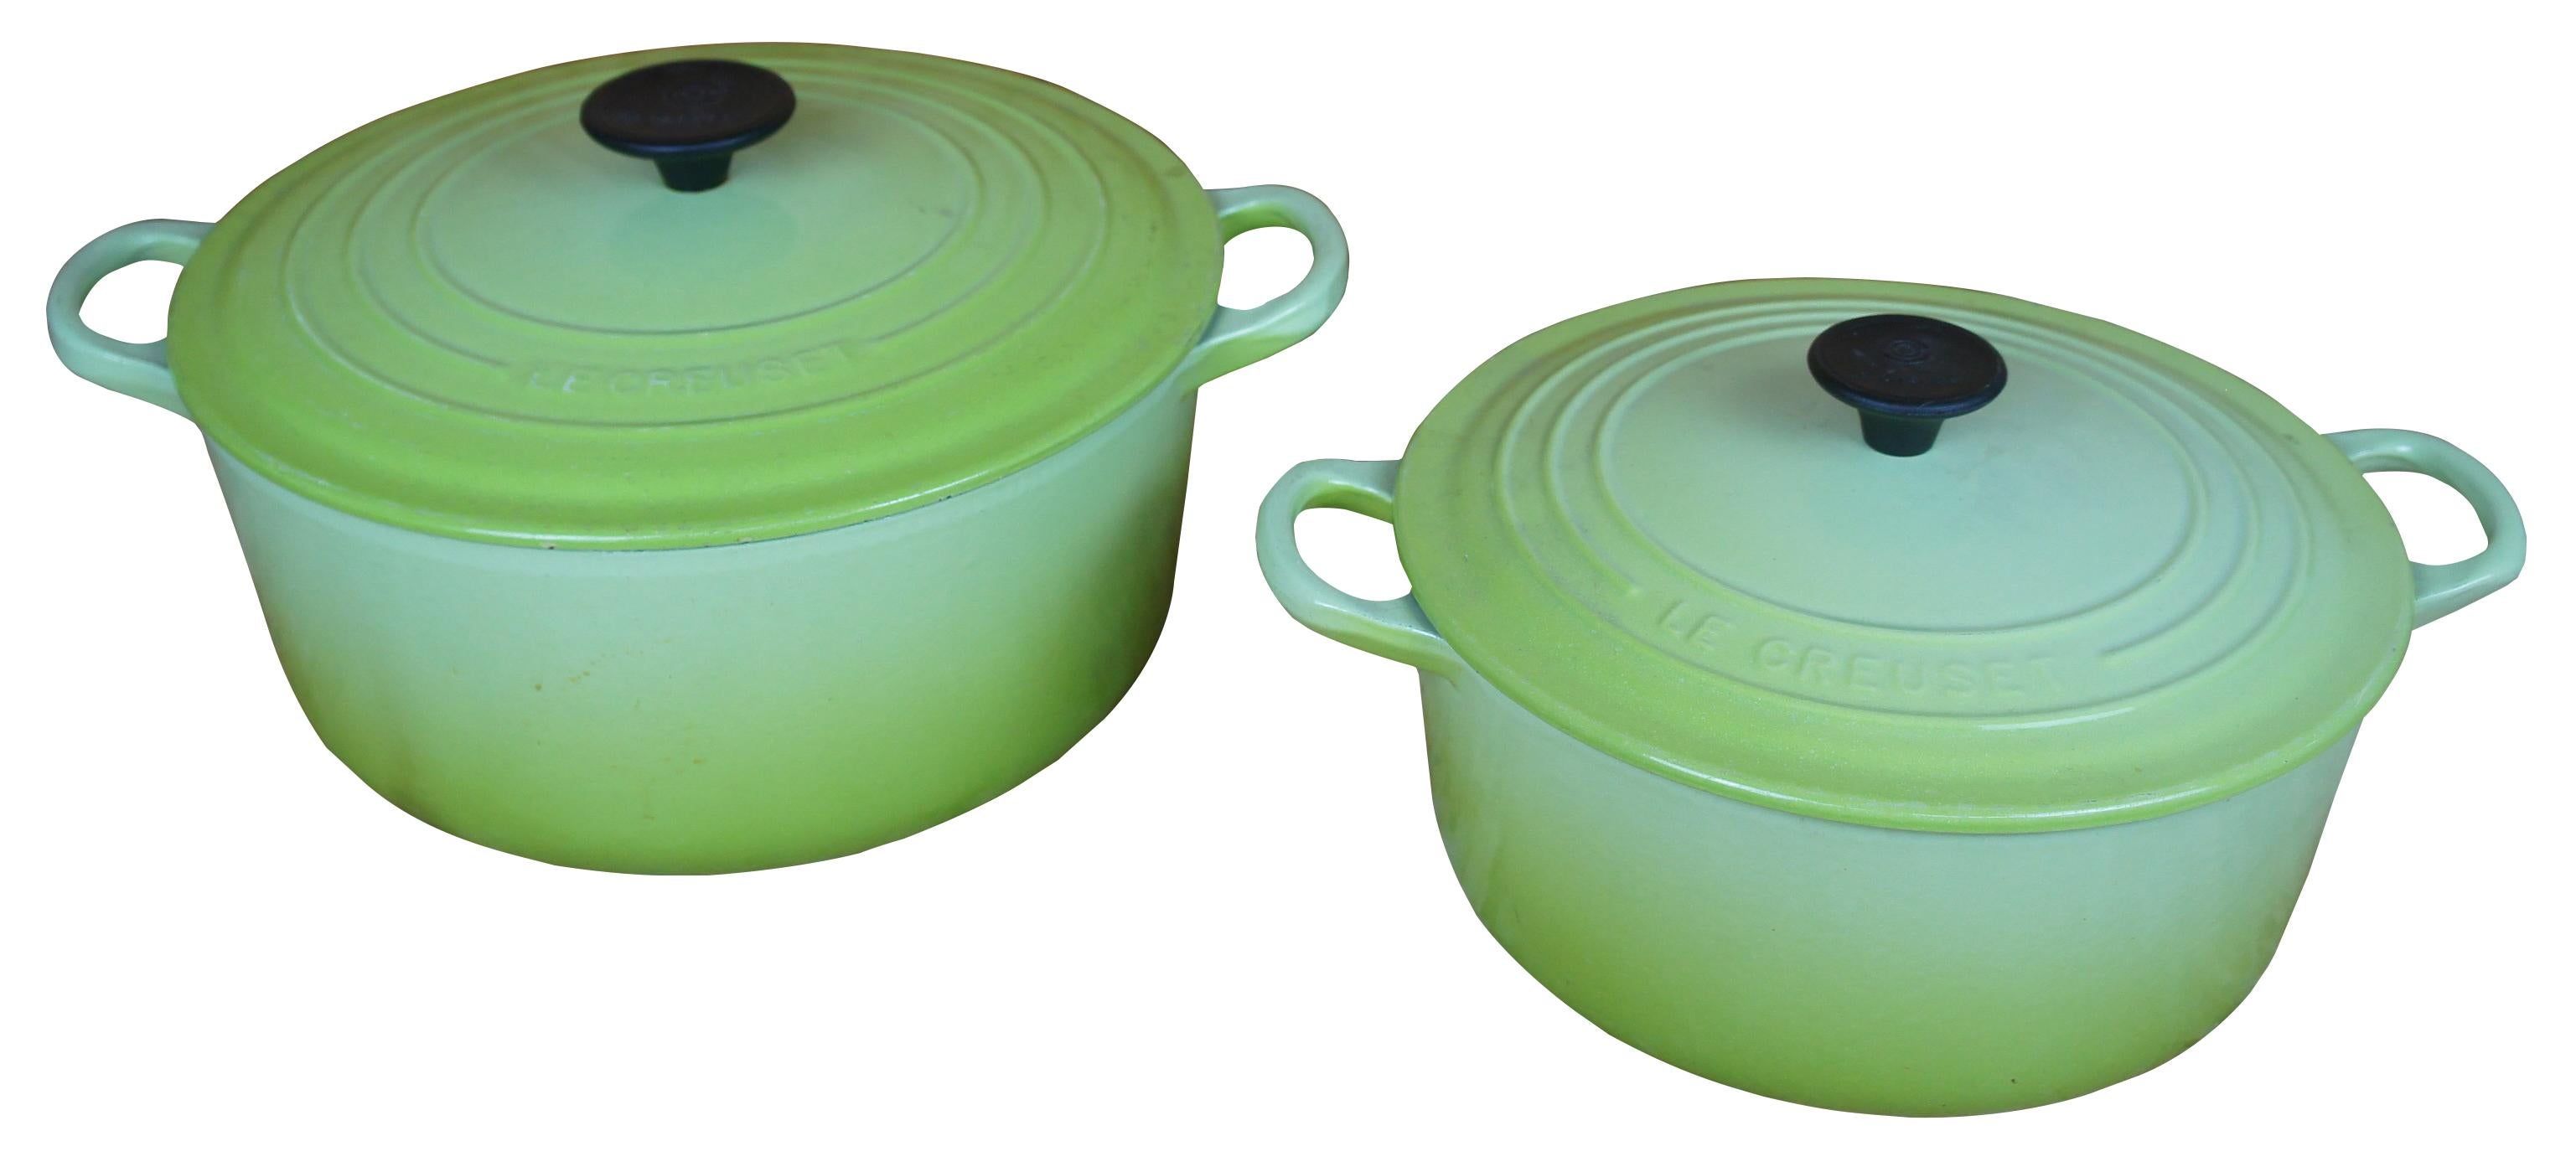 Pair of Le Creuset cast iron and enamel in green, one 5.5 quarts and one 3.5 quarts round dutch ovens with lids.
 